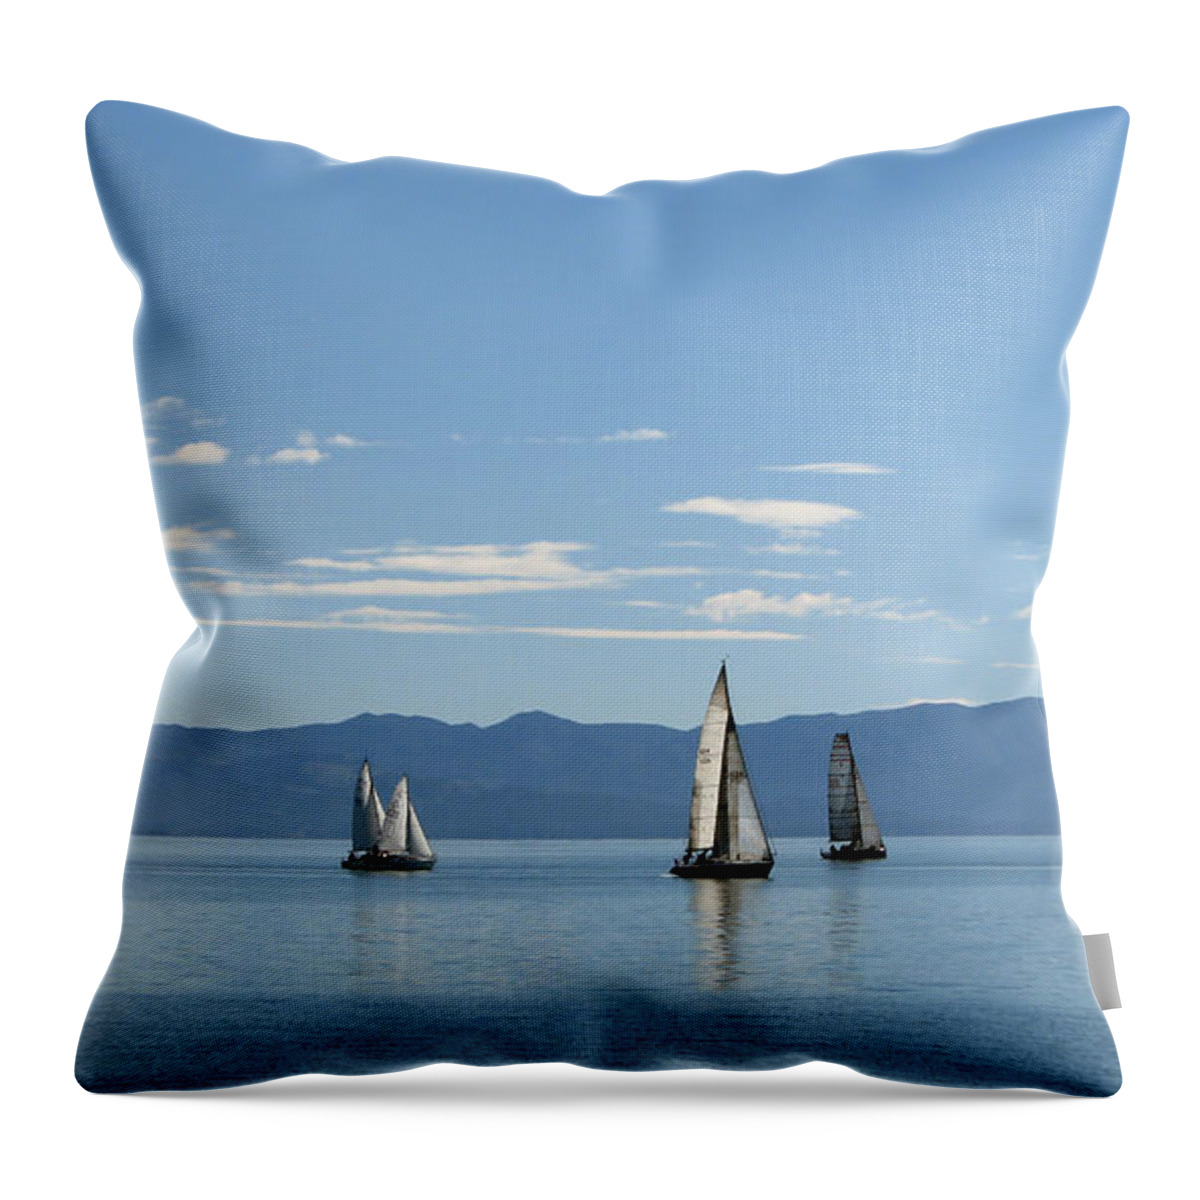  Ocean Throw Pillow featuring the photograph Sailboats in Blue by Jola Martysz